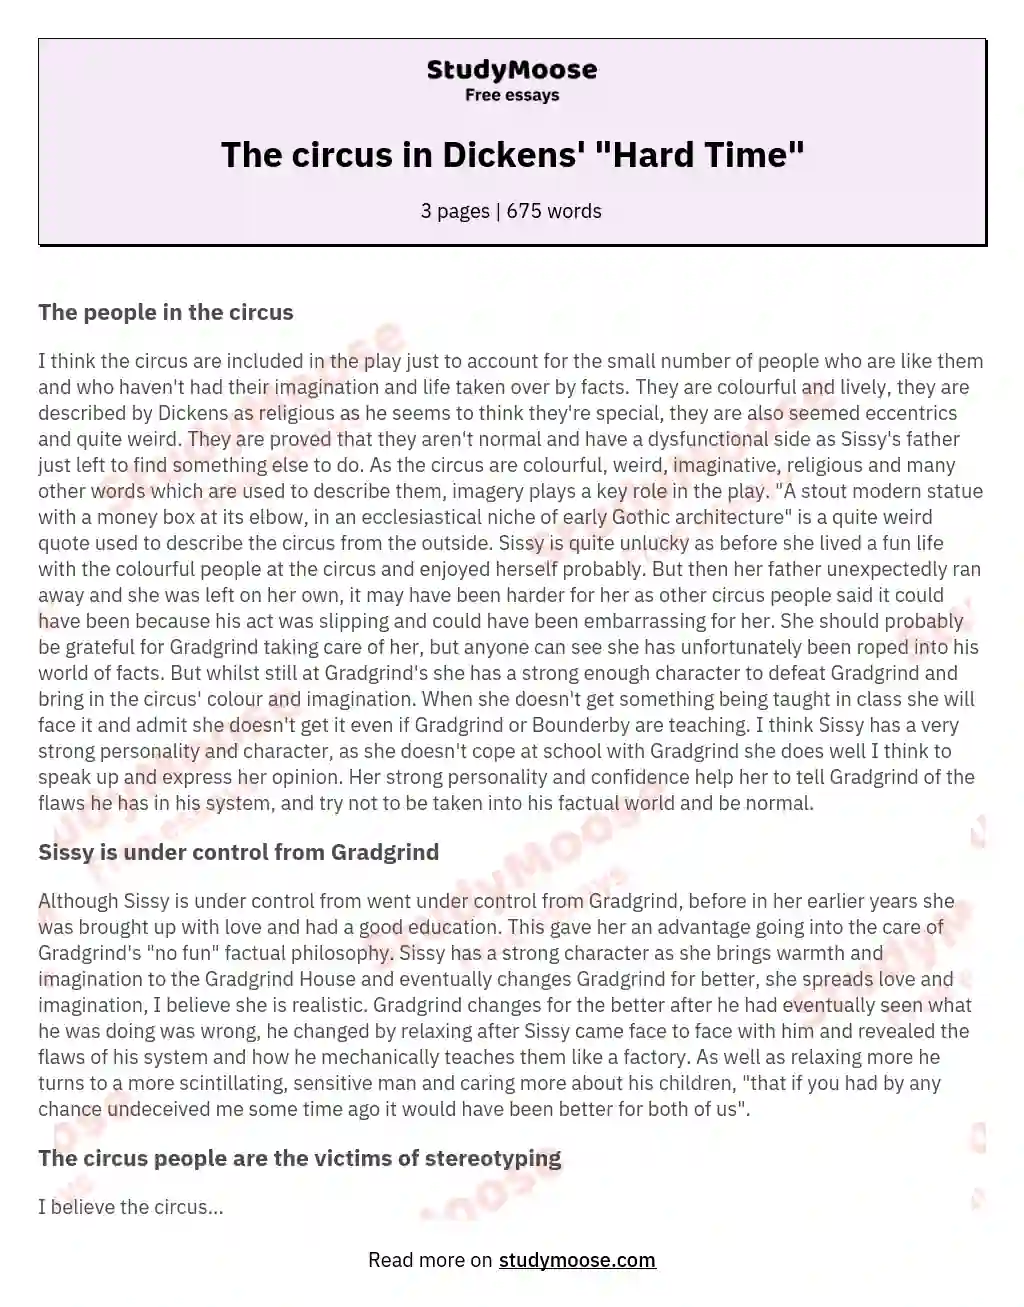 The circus in Dickens' "Hard Time"